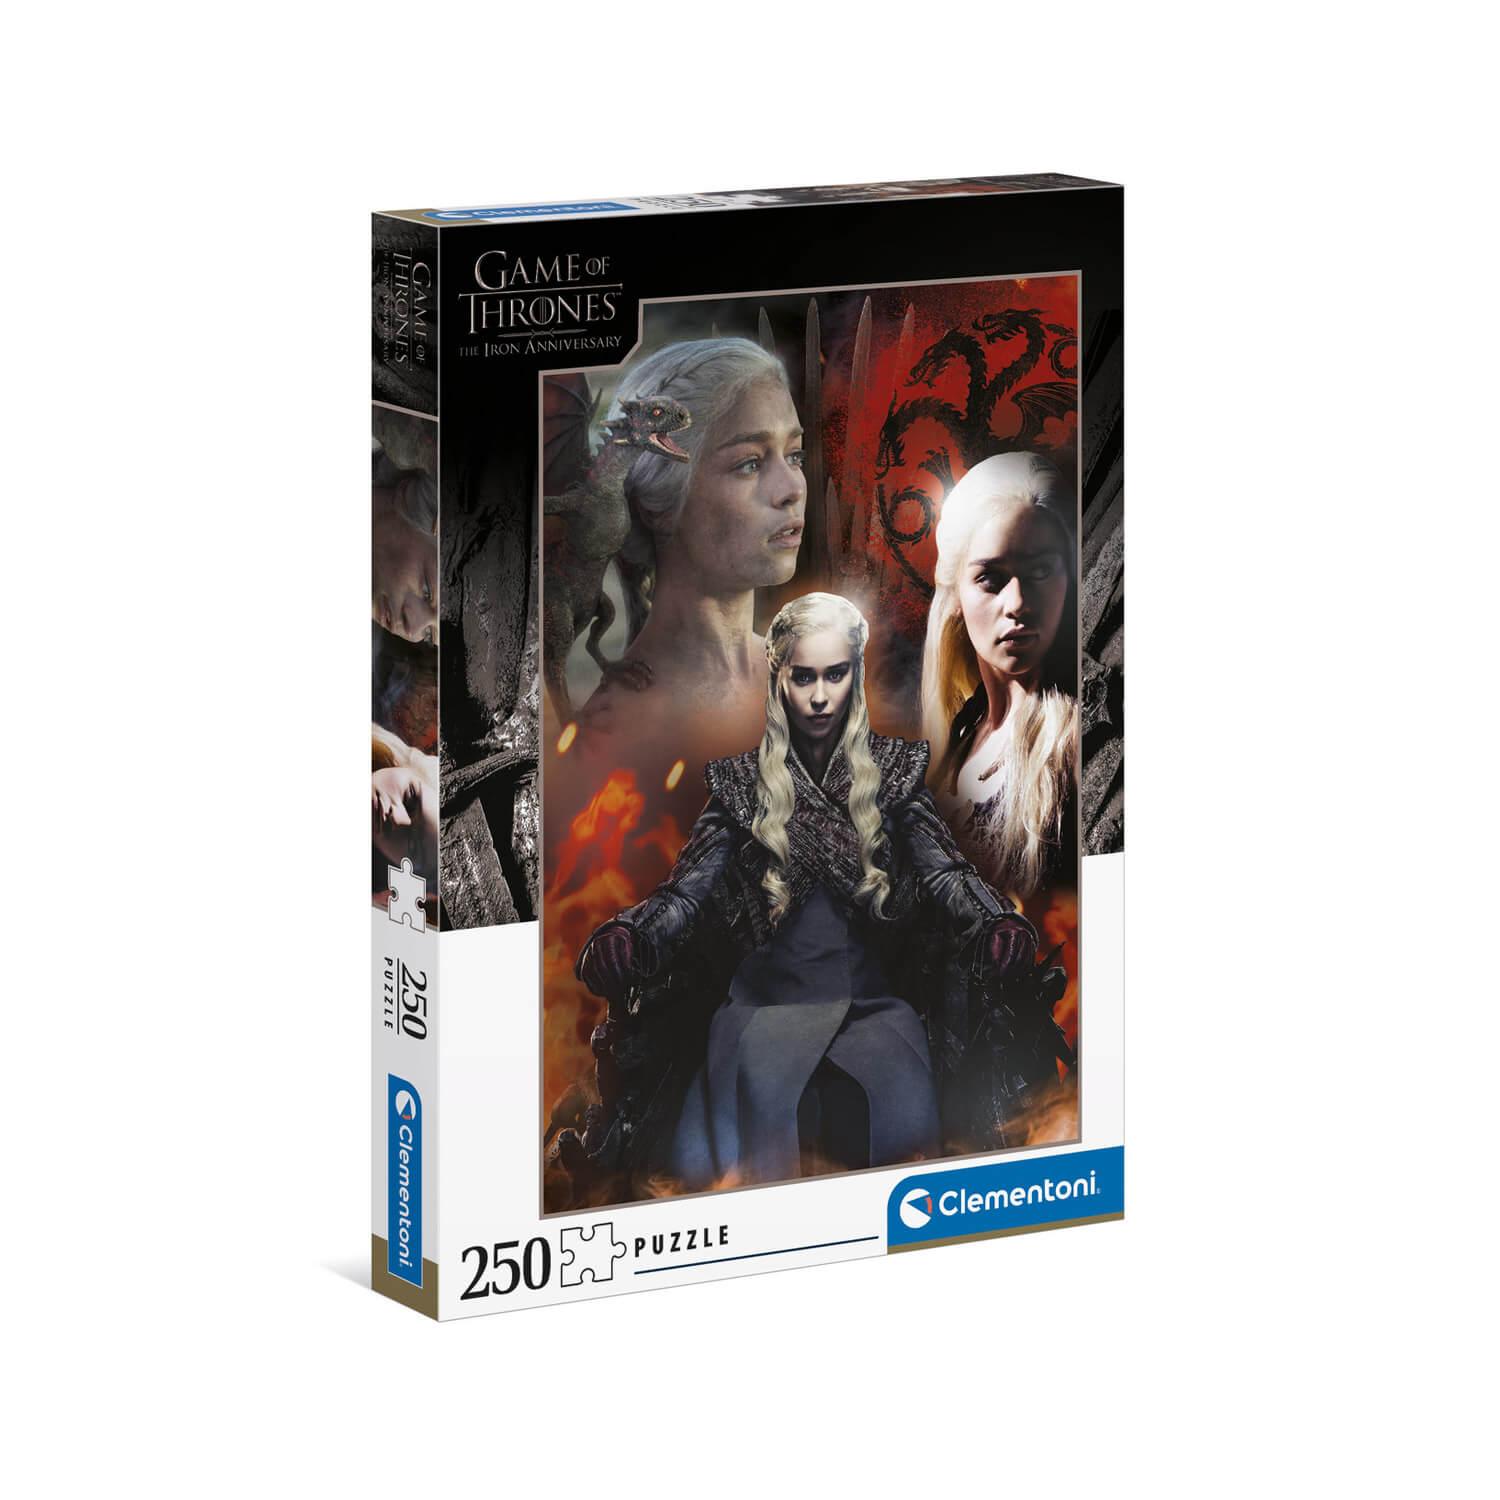 Puzzle 250 pièces : Game of Thrones